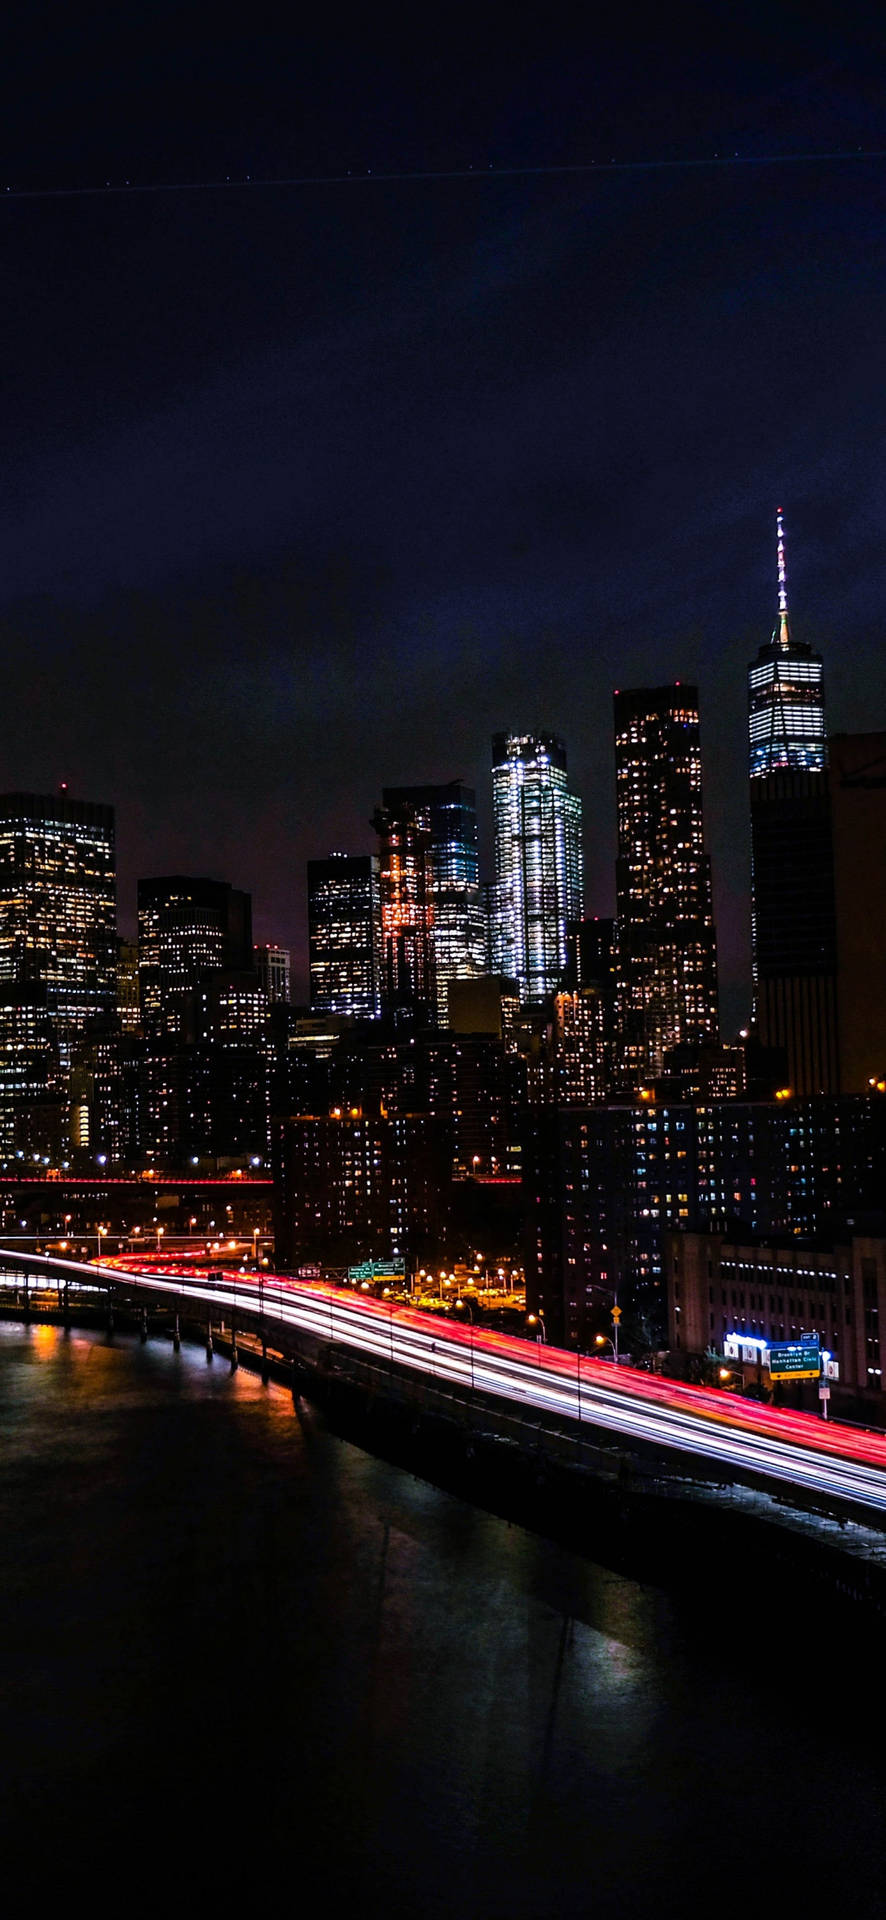 A stunning view of New York Cityscape Wallpaper